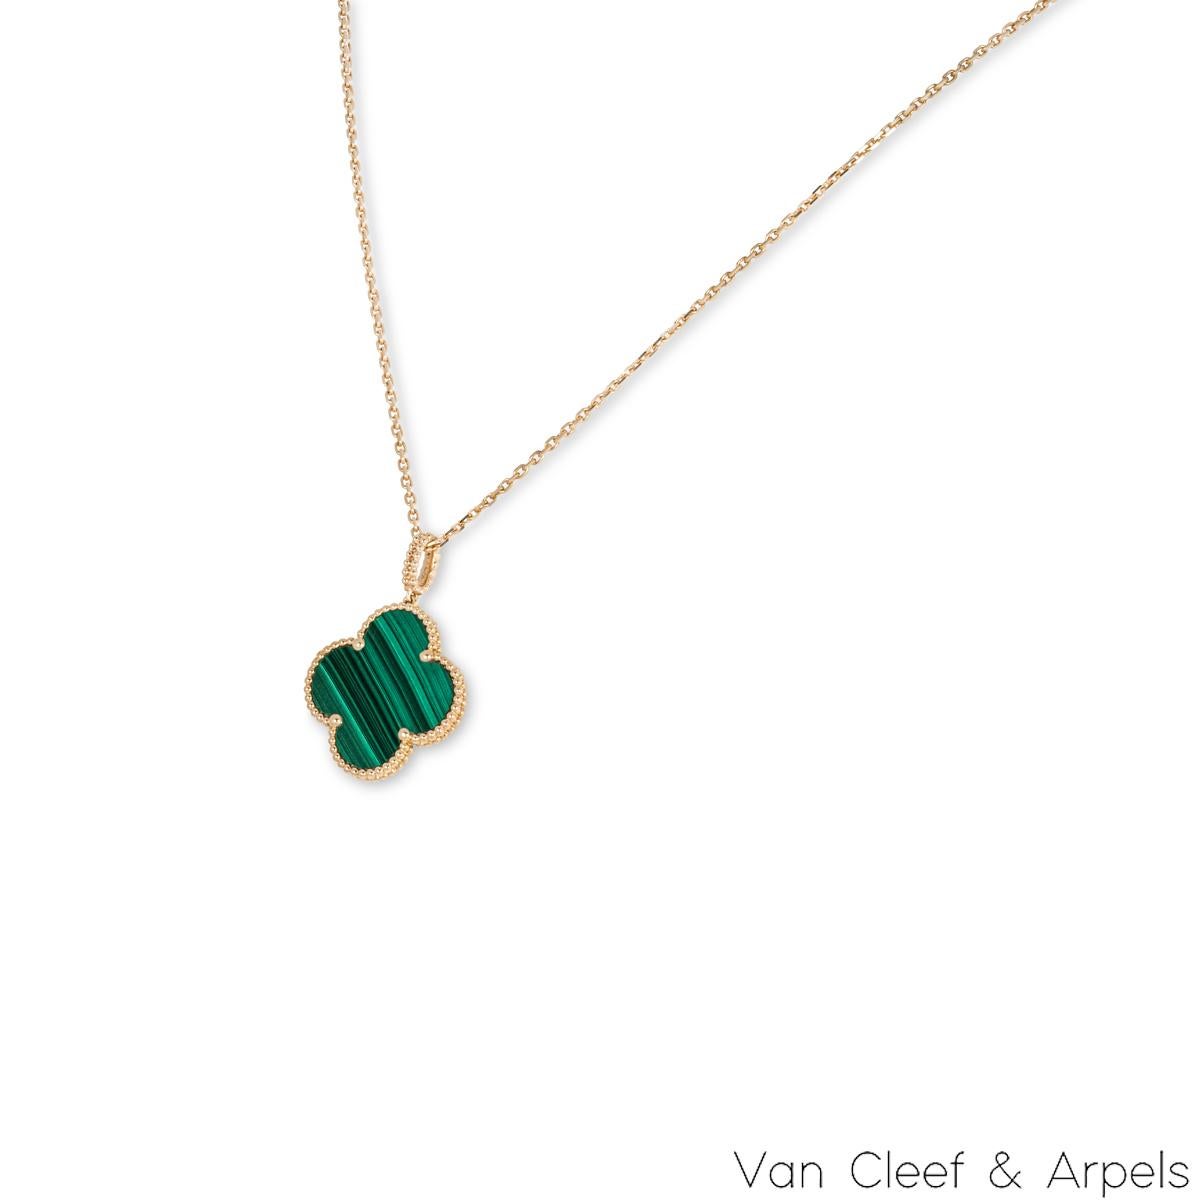 A gorgeous 18k yellow gold malachite necklace by Van Cleef & Arpels from the Magic Alhambra collection. The necklace comprises of the iconic 4-leaf clover motif pendant set with a malachite inlay and complemented with a beaded edge. The pendant